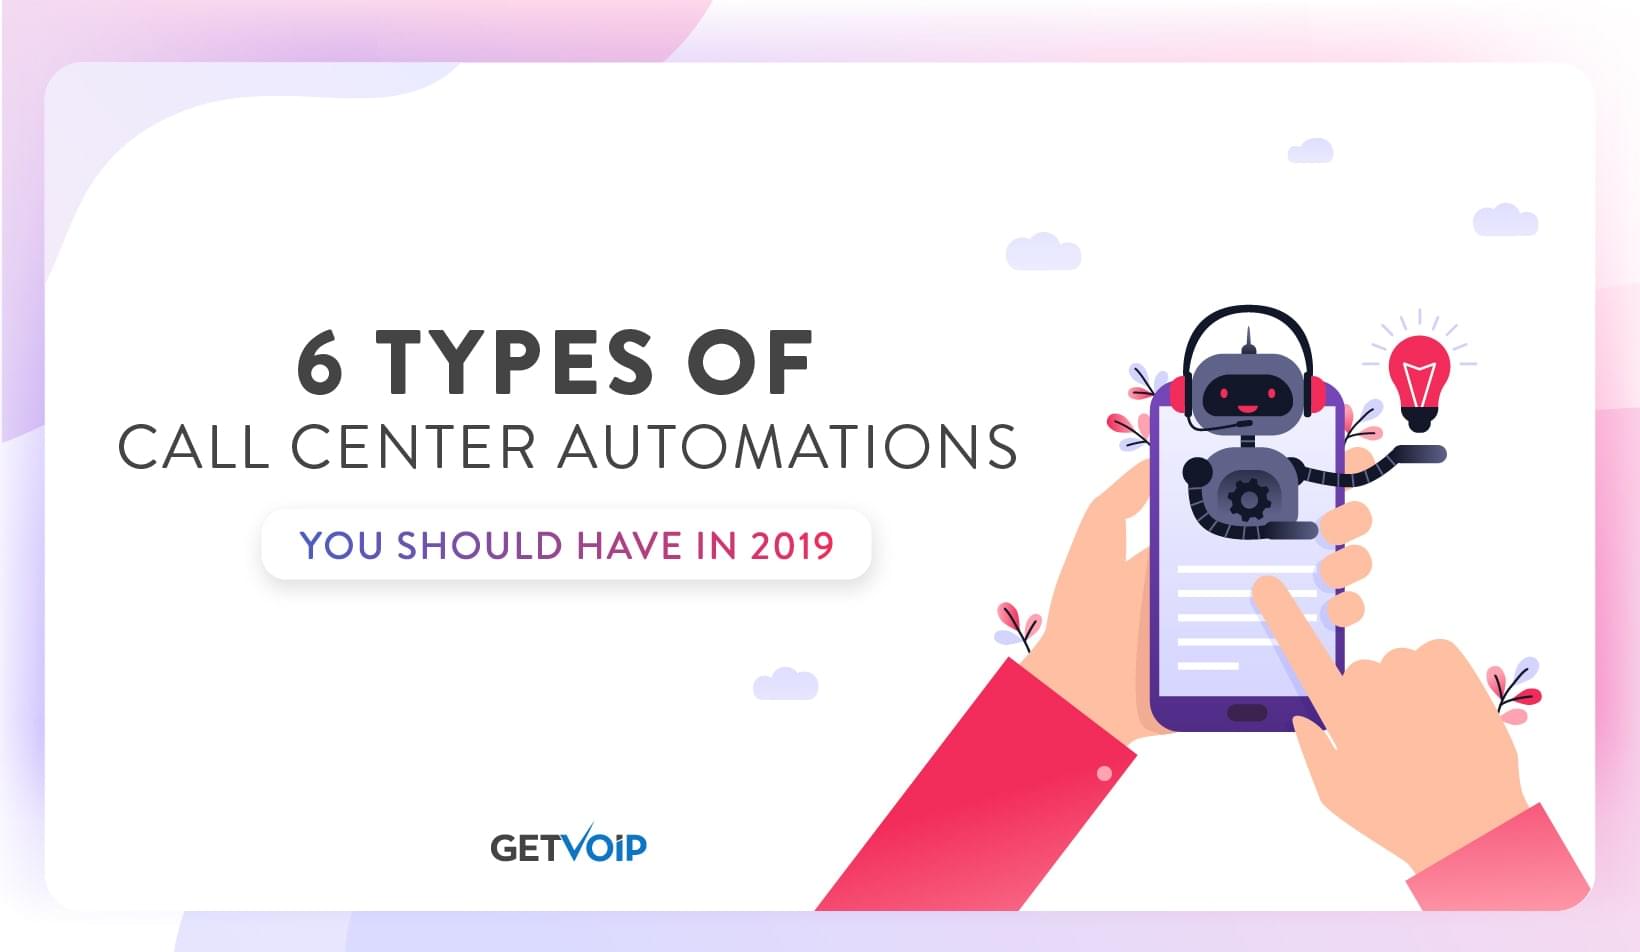 6 Types of Call Center Automations You Should Have